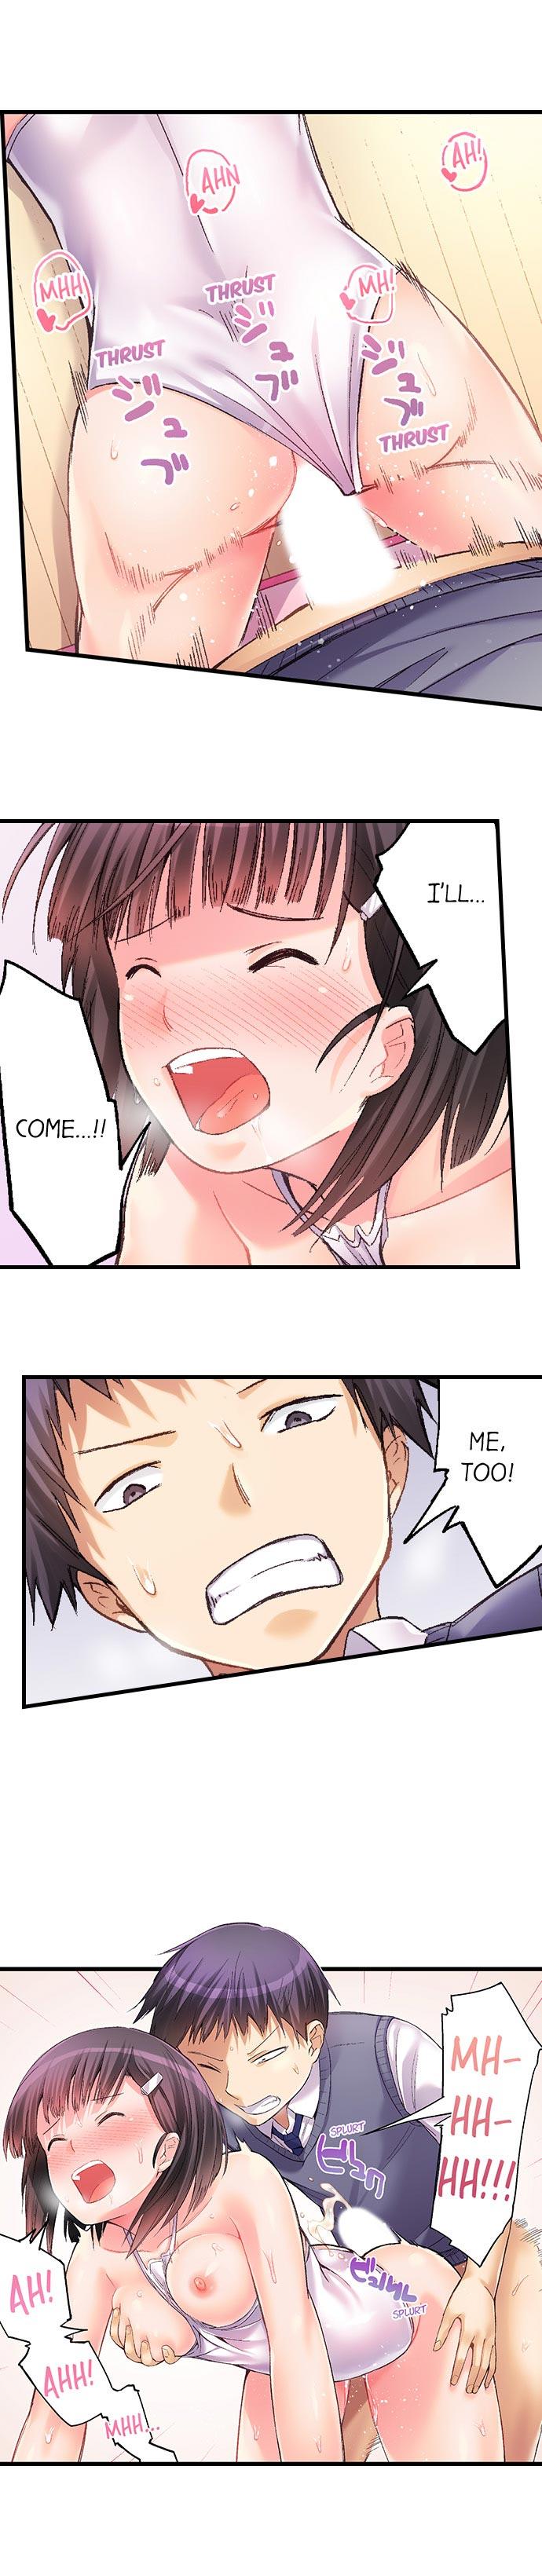 No Panty Booty Workout! Ch. 1 - 8 53